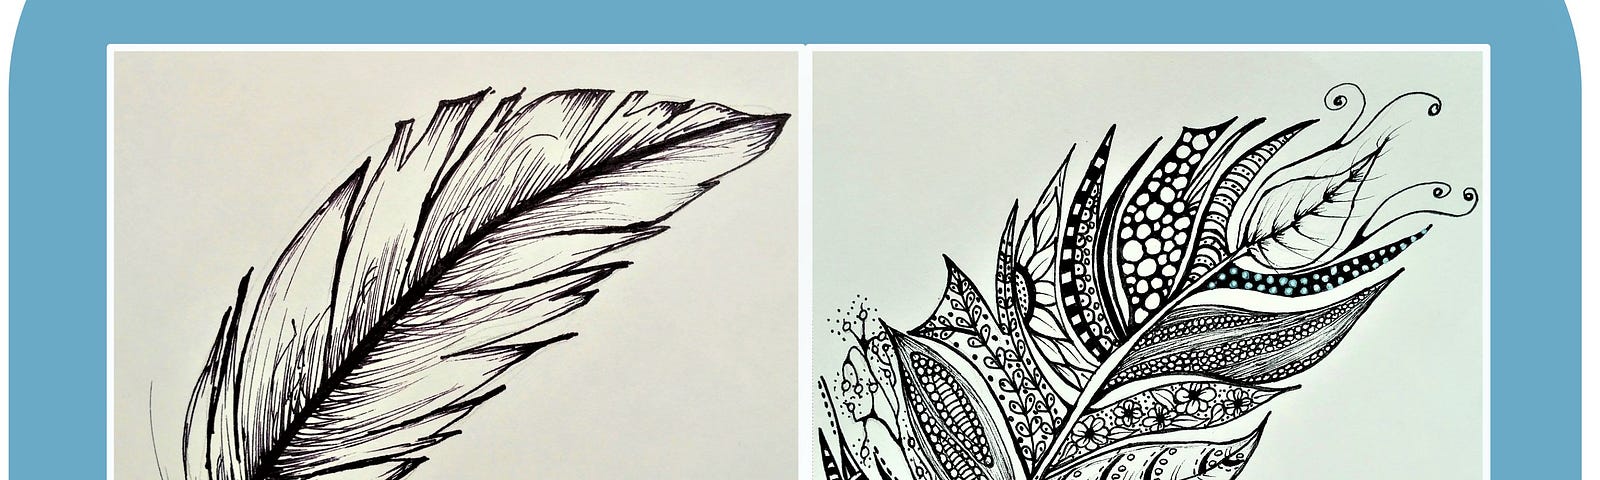 Two pictures on hand drawn ink on white paper feathers in two different styles. Ink and line drawing of a feather.